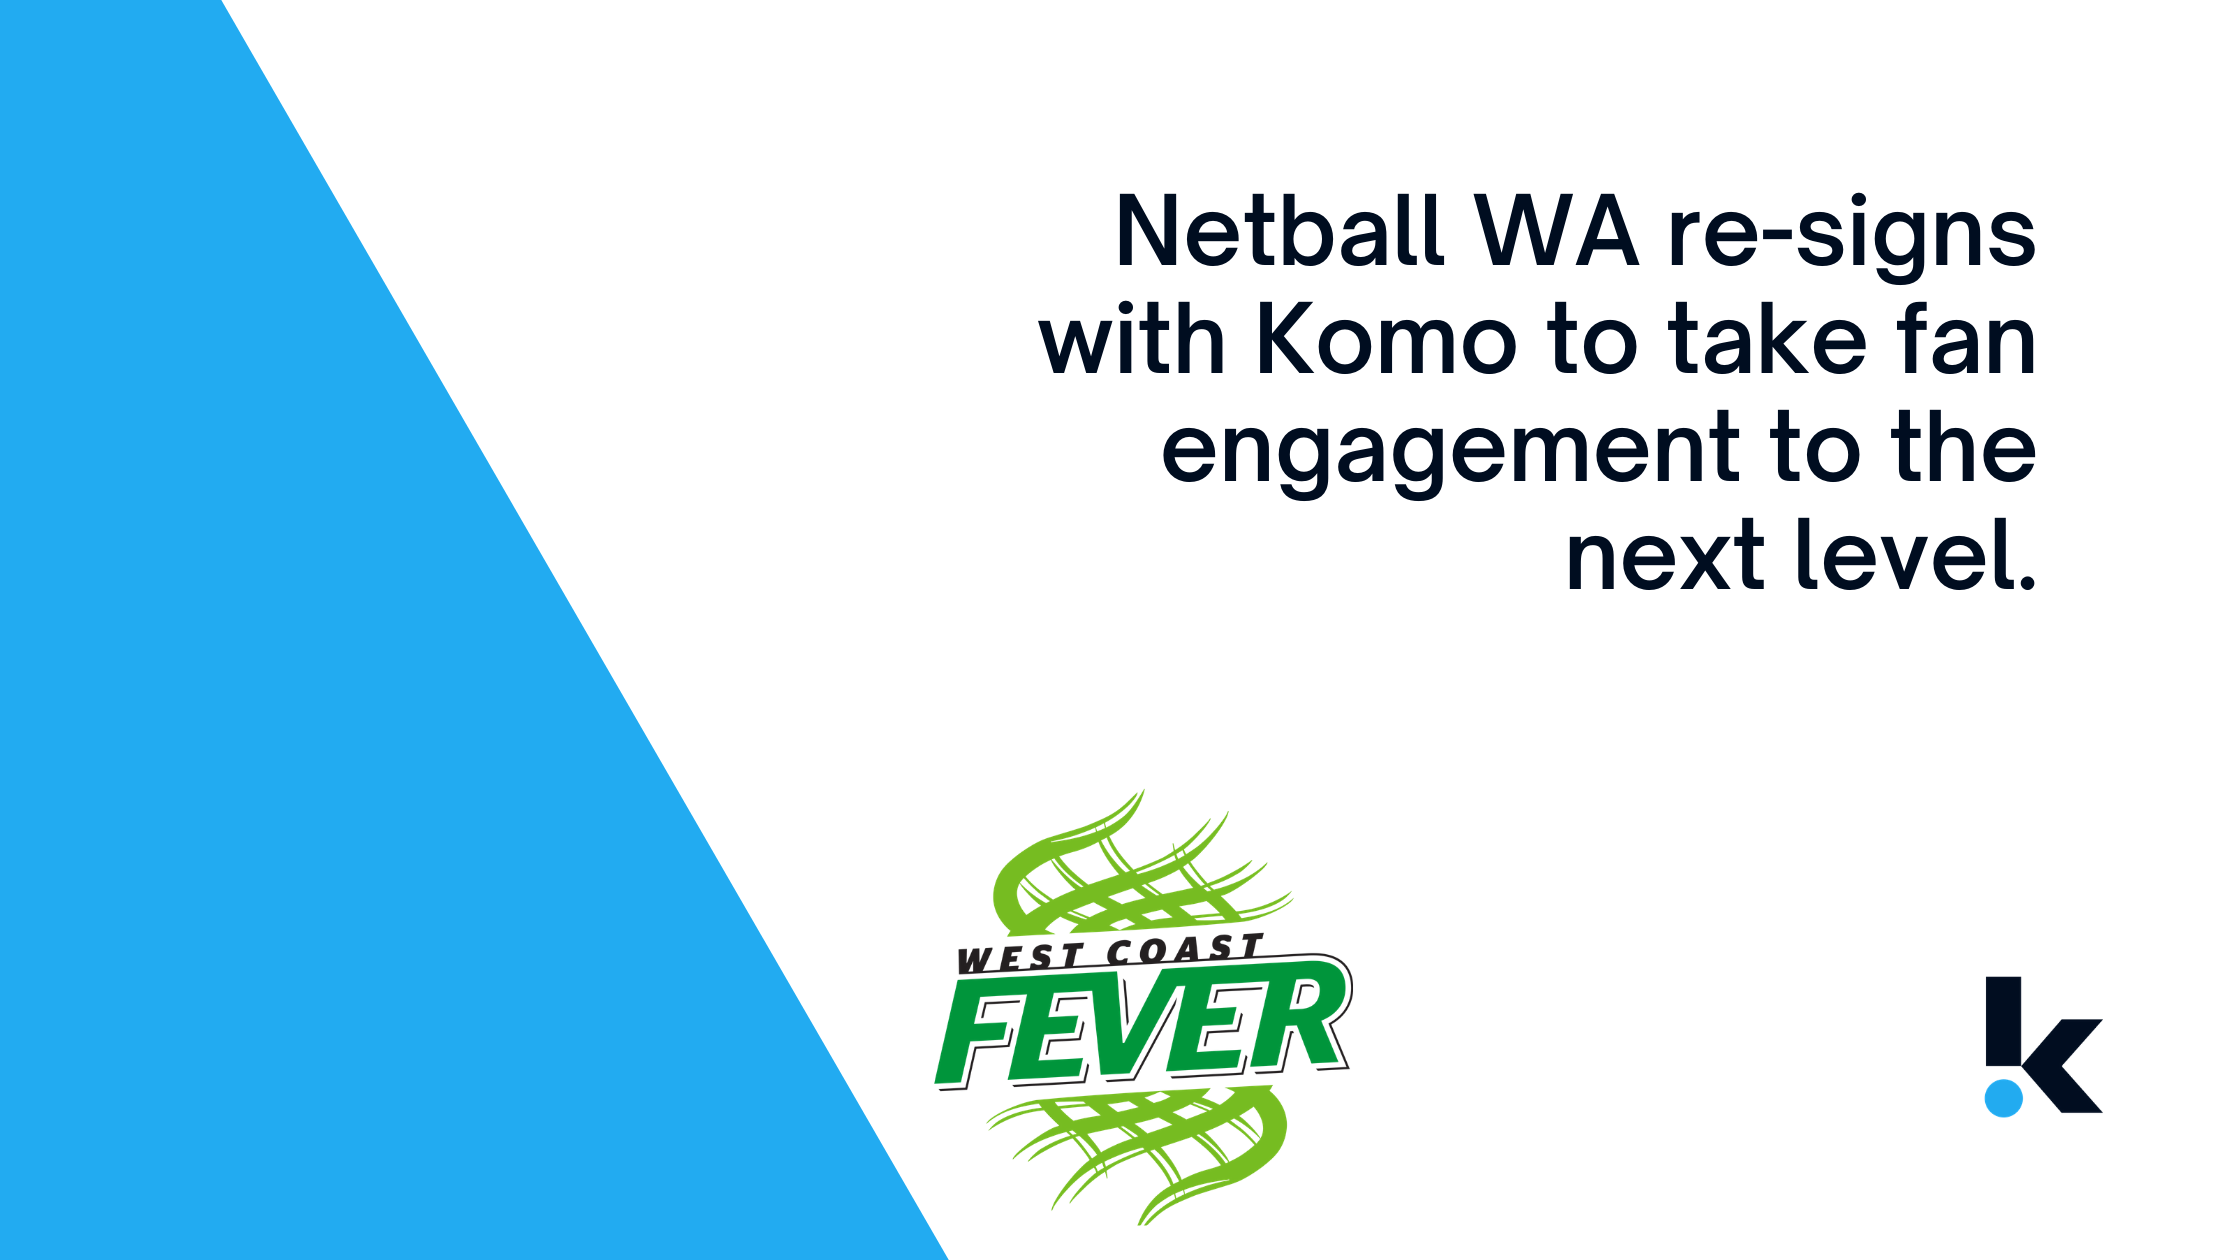 Netball WA re-signs with Komo Digital to take fan engagement to the next level. Read more about our new partnership in our latest blog.